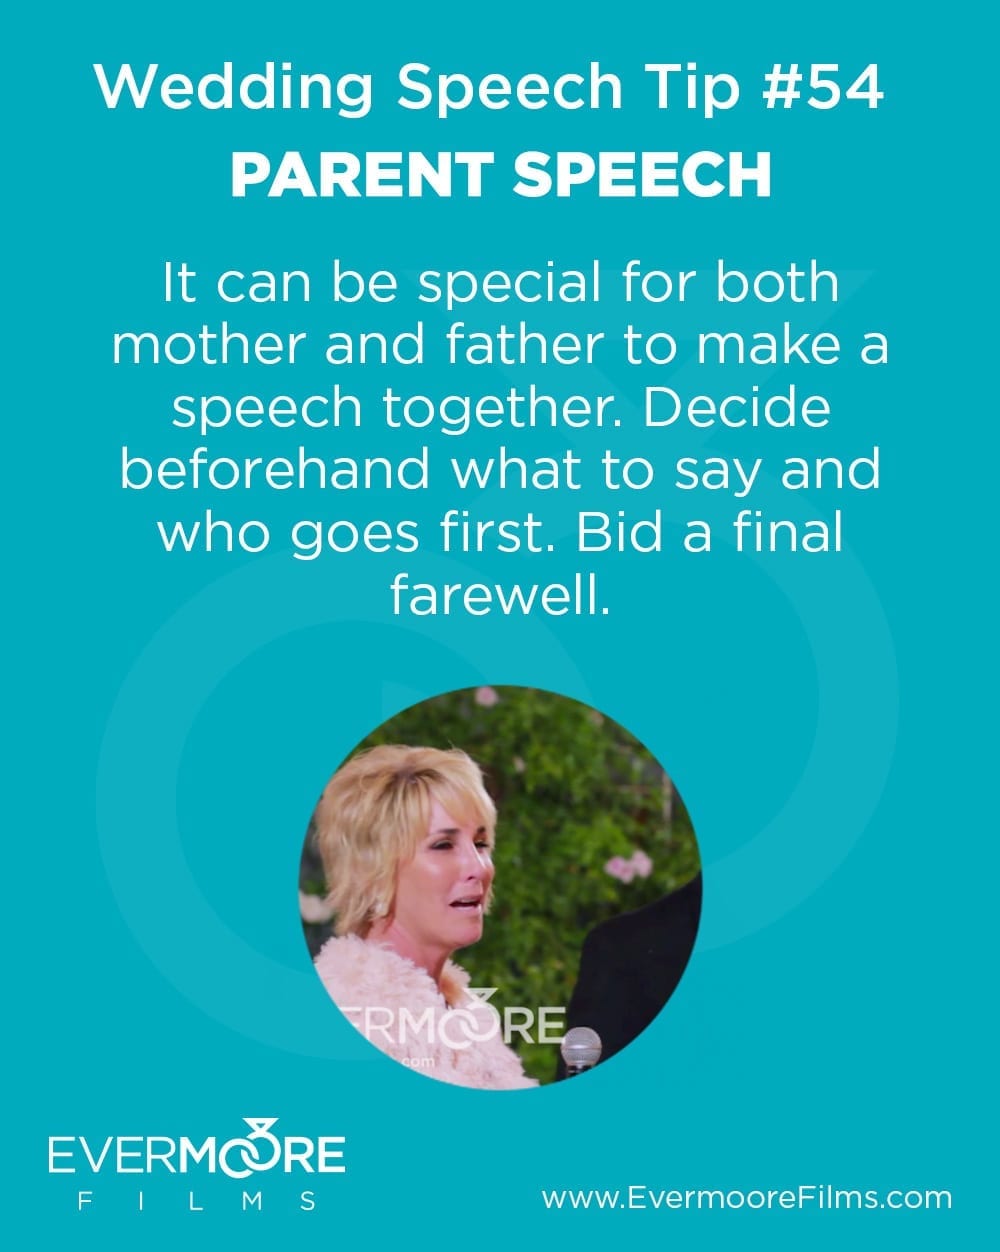 Parent Speech | Wedding Speech Tip #54 | Evermoore Films | It can be special for both mother and father to make a speech together. Decide beforehand what to say and who goes first. Bid a final farewell for the night!